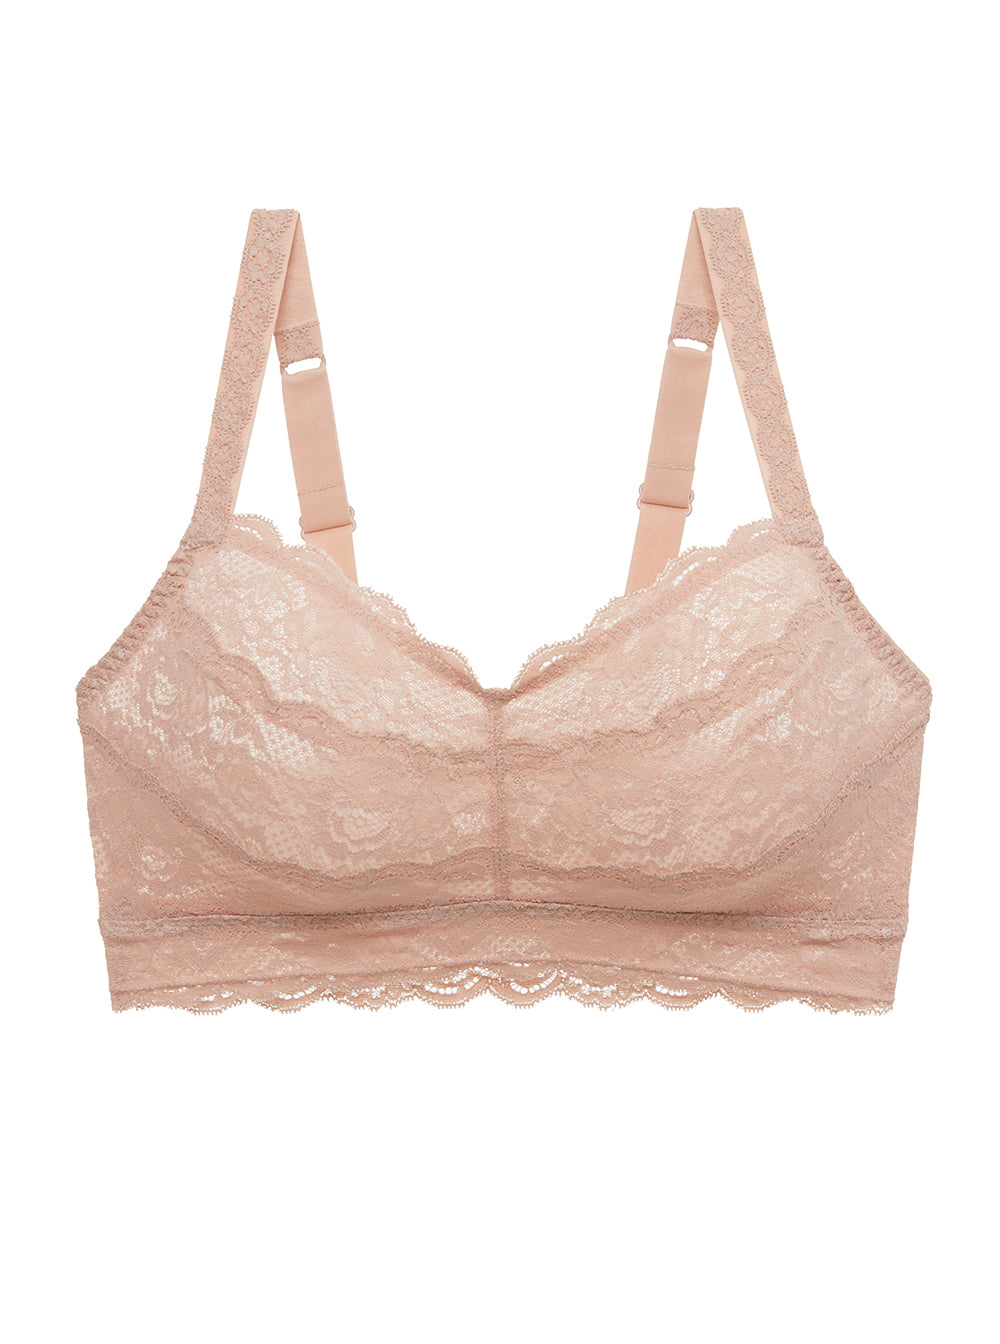 Cosabella Never Say Never Extended Soft Sweetie Bralette in Blush - Busted  Bra Shop